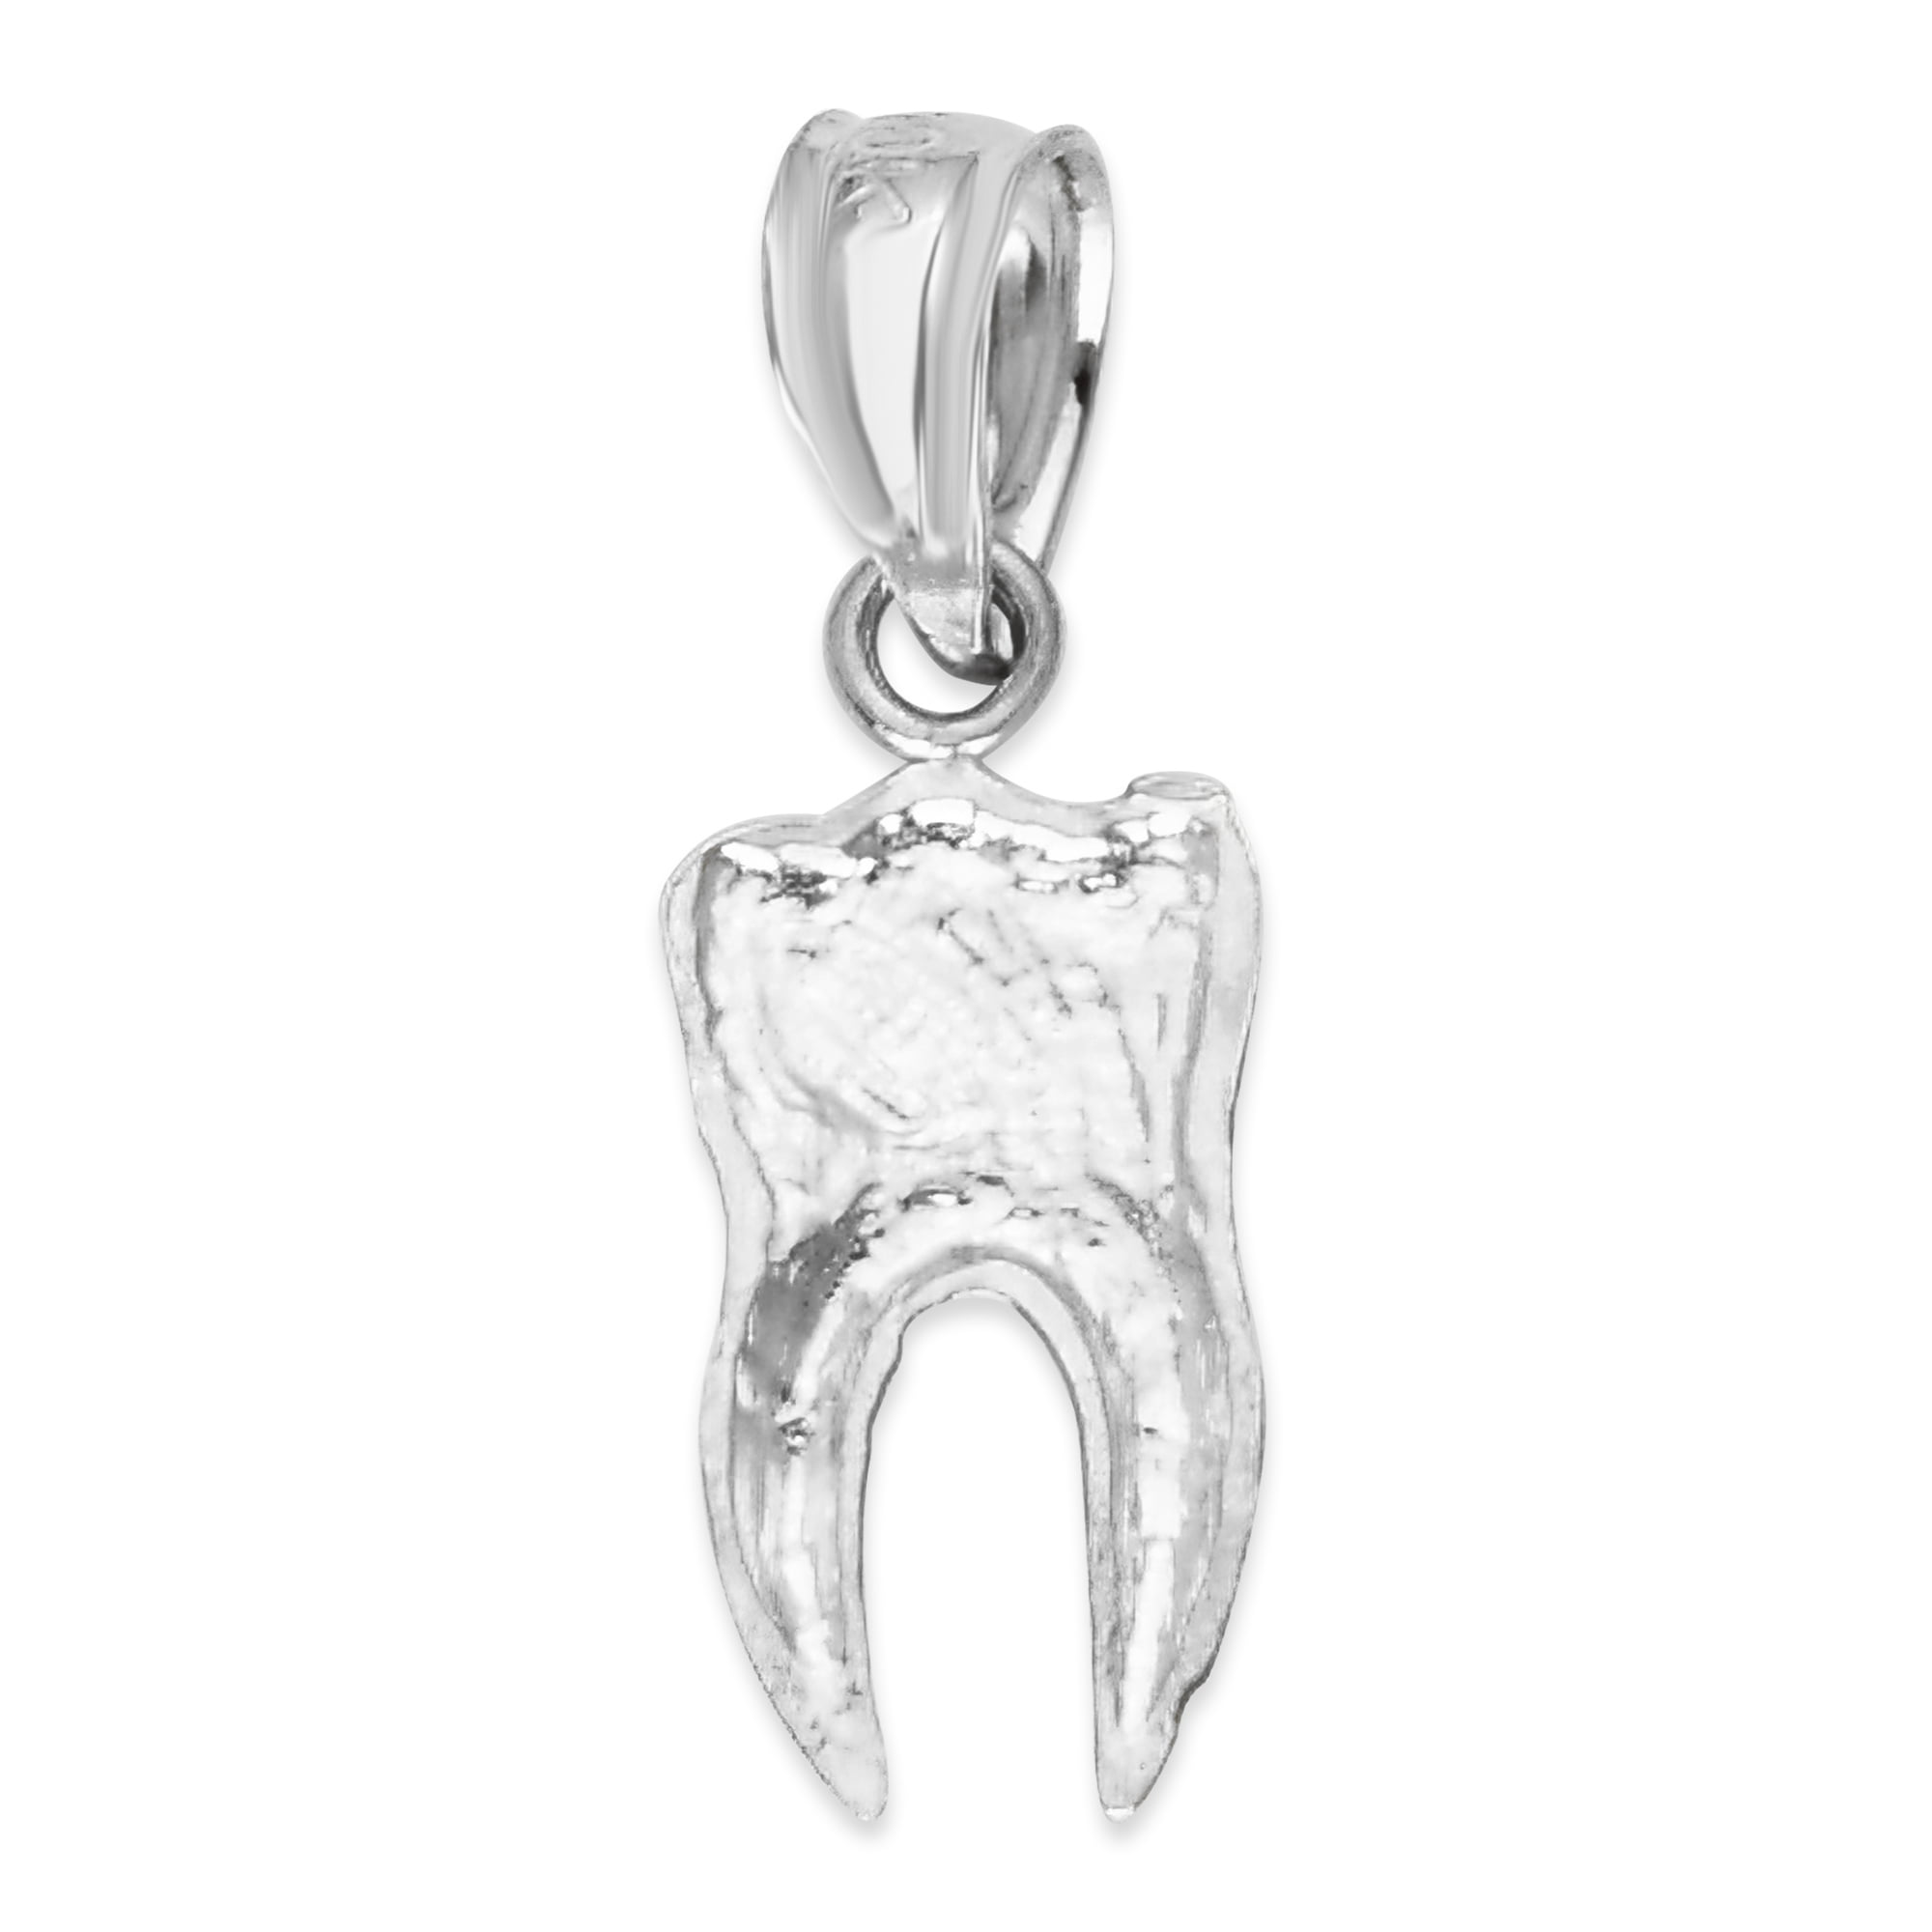 cooltime Smile Face Tooth Necklace Dentist Gifts